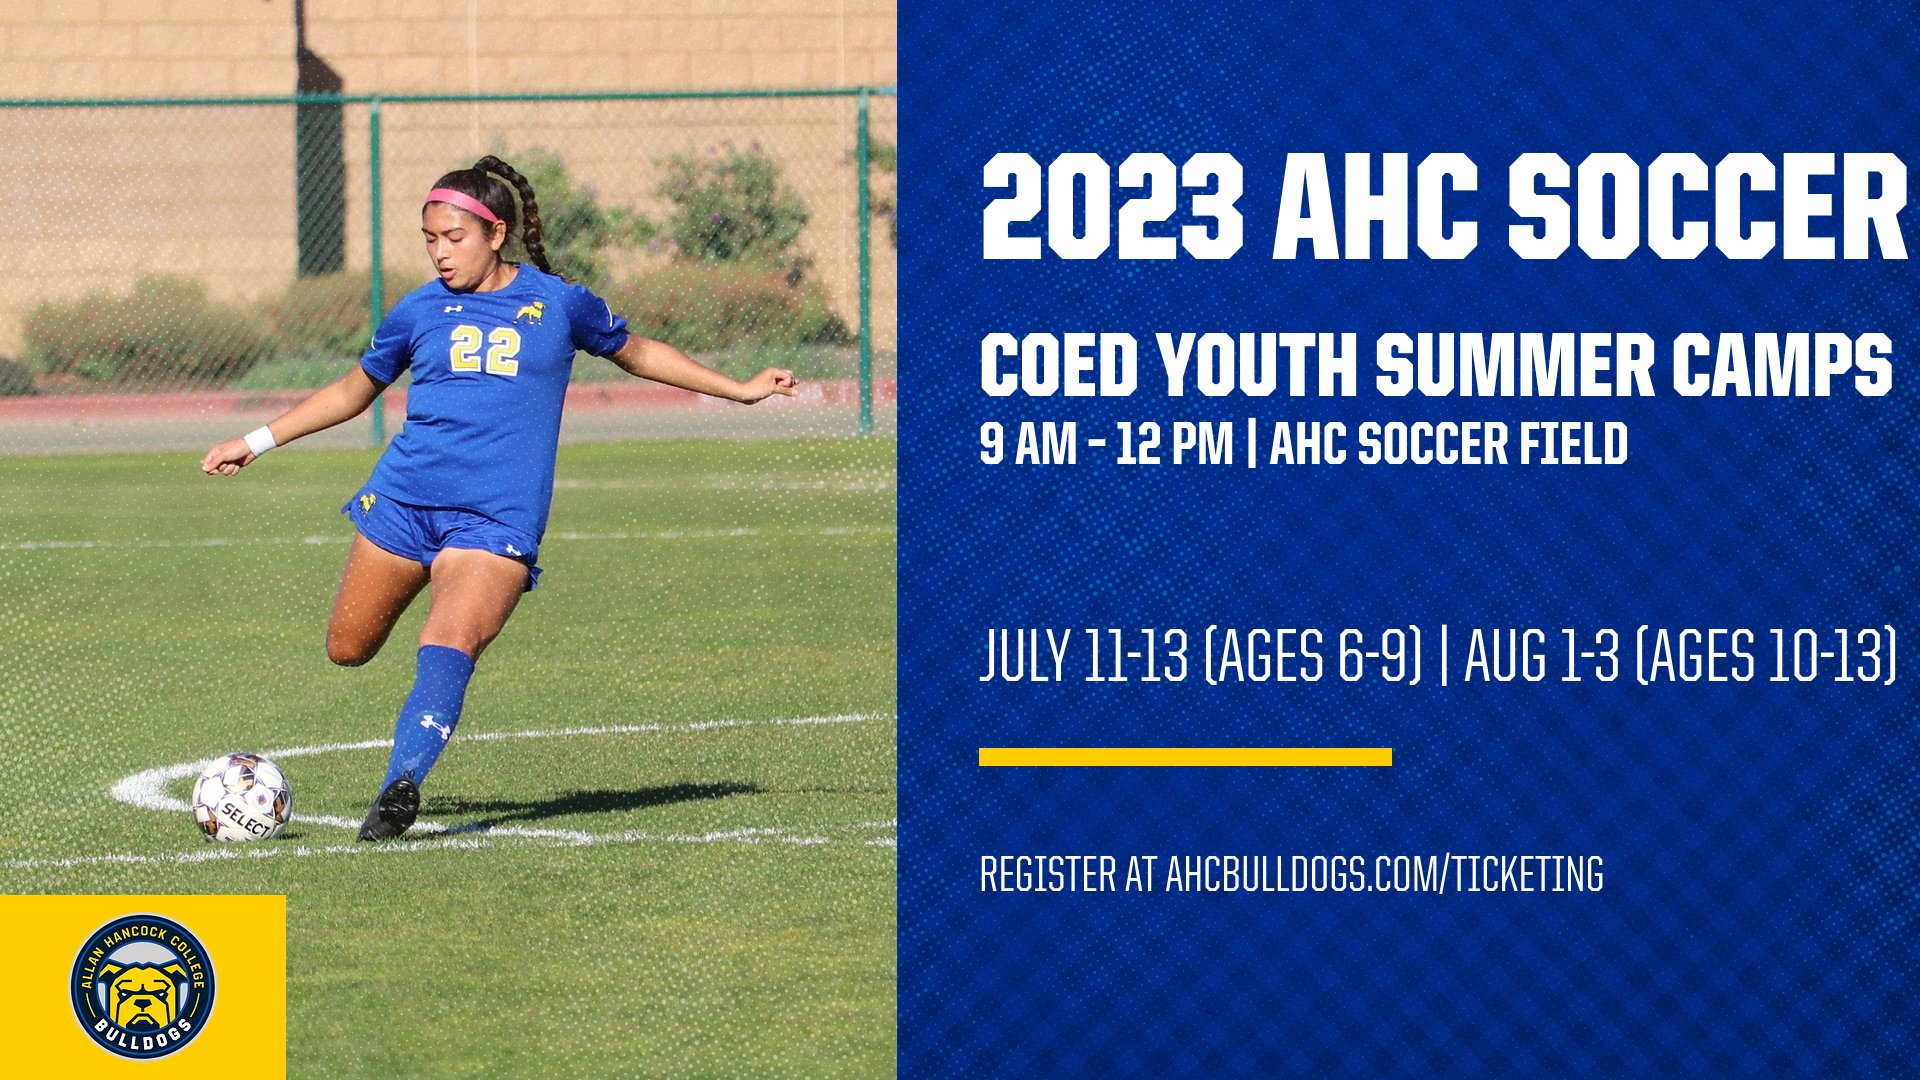 Soccer Announces Youth Summer Camp Dates, Registration Now Open